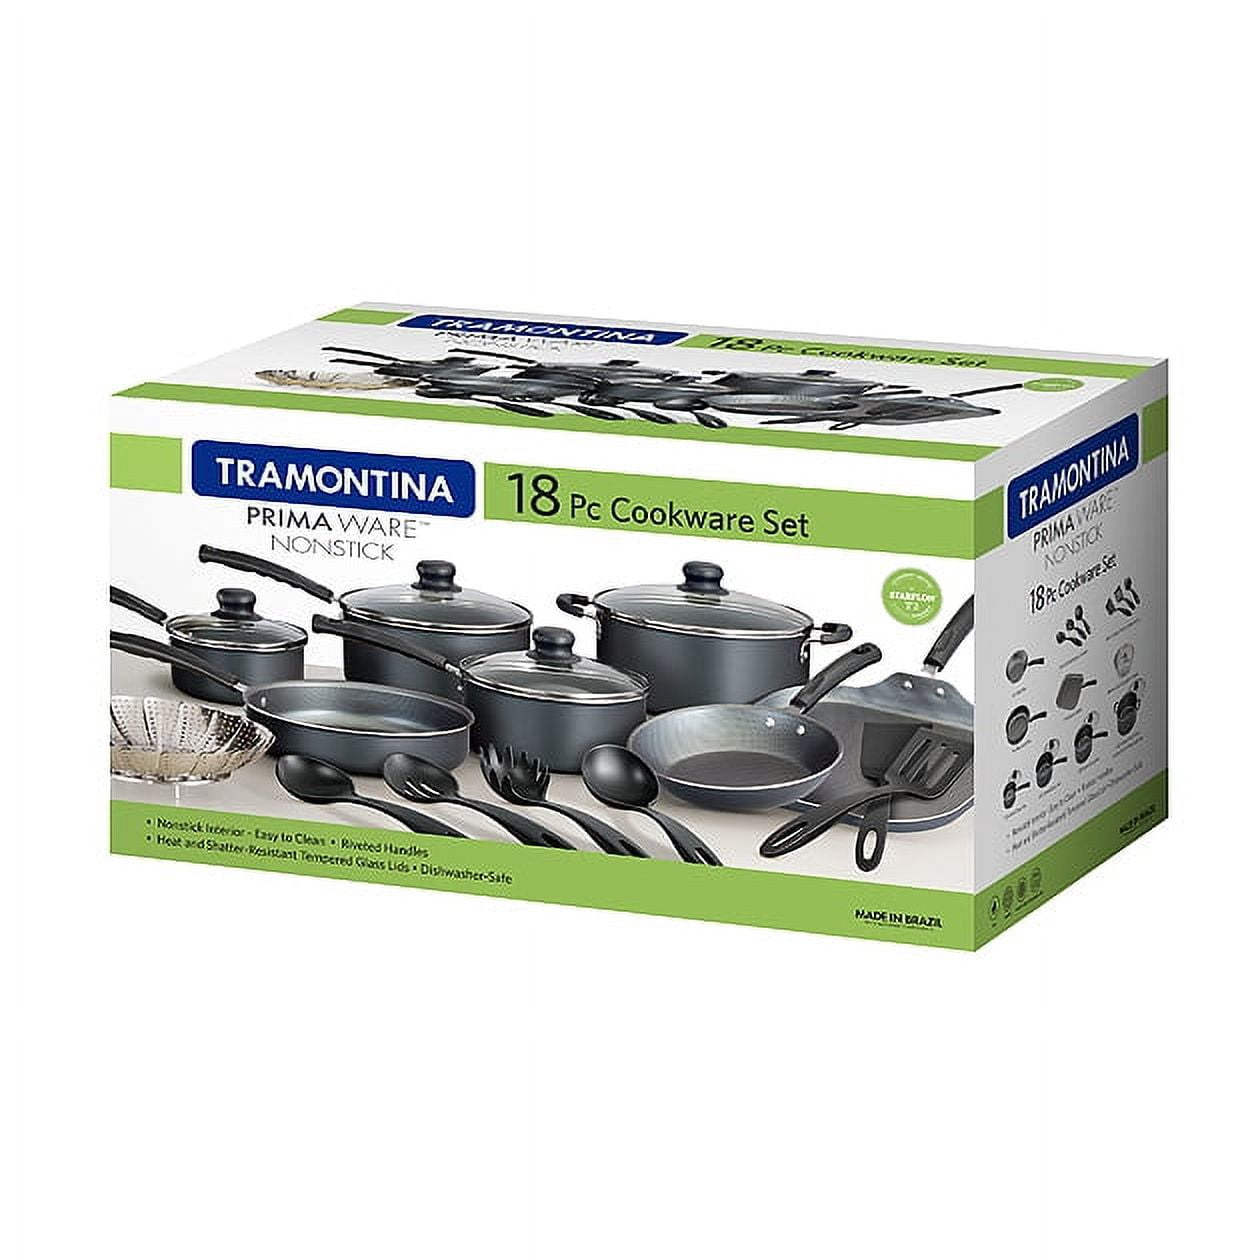 11 Pc Nonstick Cookware Set- Charcoal Gray - Tramontina US